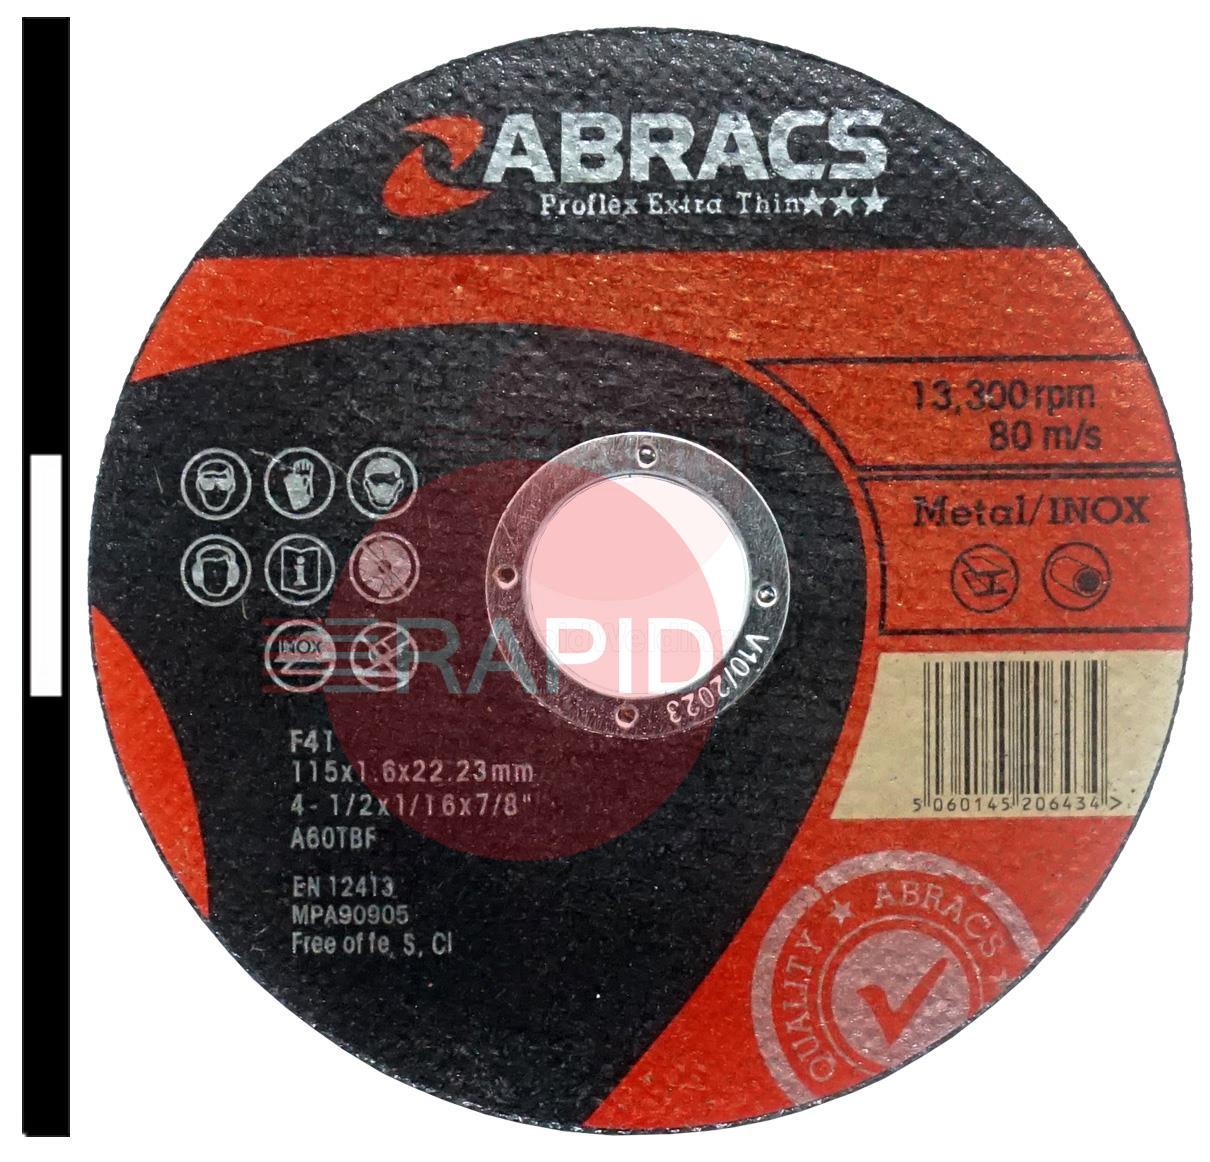 PFET11516FI  Abracs Proflex 115mm (4.5) Slitting Cutting Disc 1.6mm Thick. Grade A60T Inox-BF for Steel & Stainless Steel.